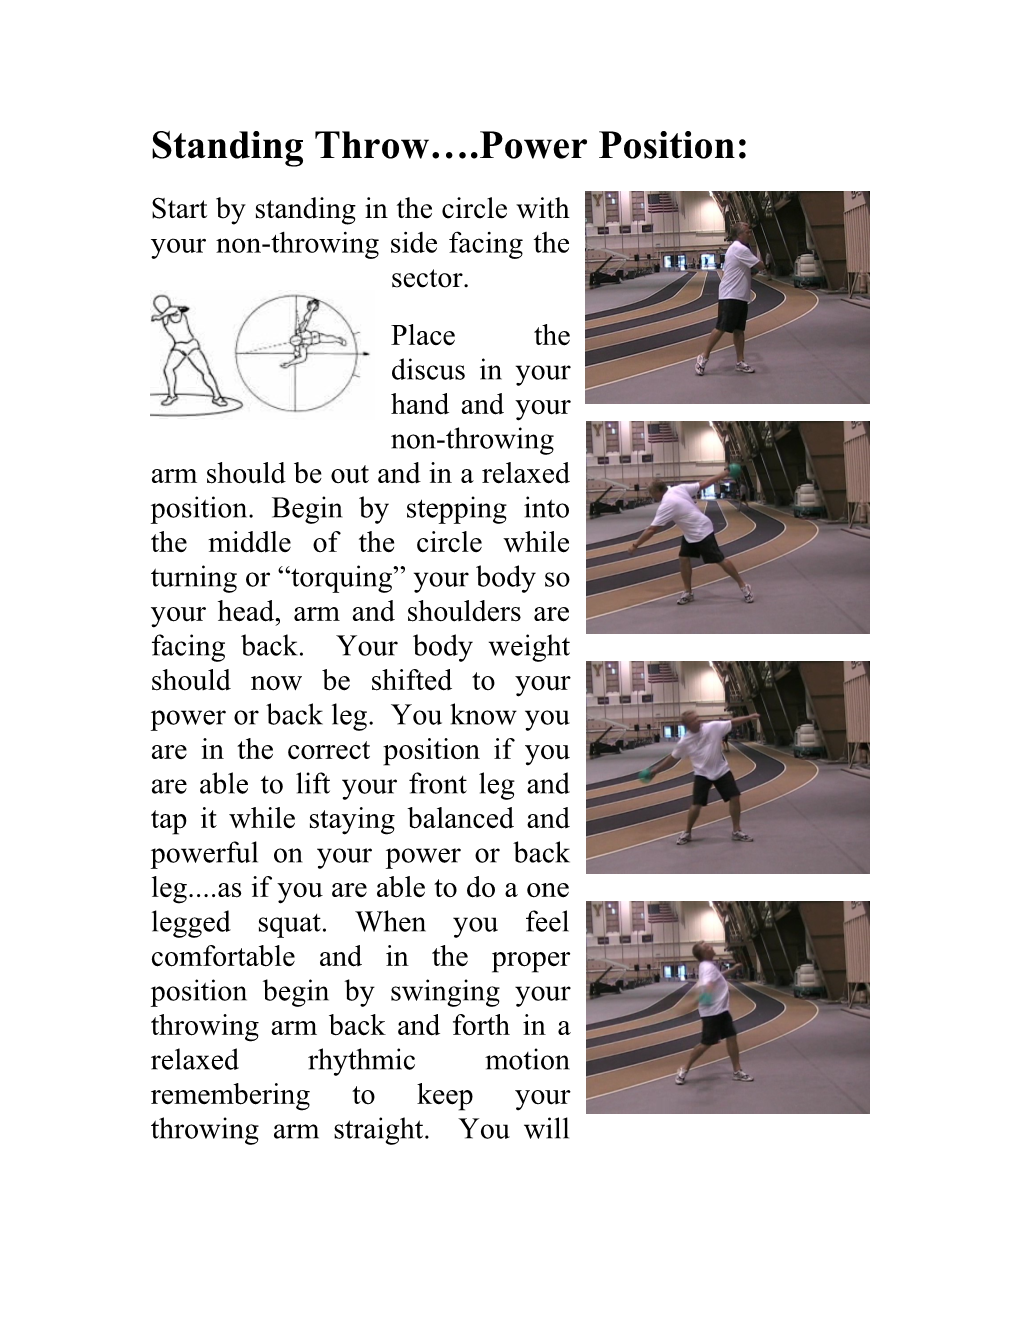 Standing Throw .Power Position